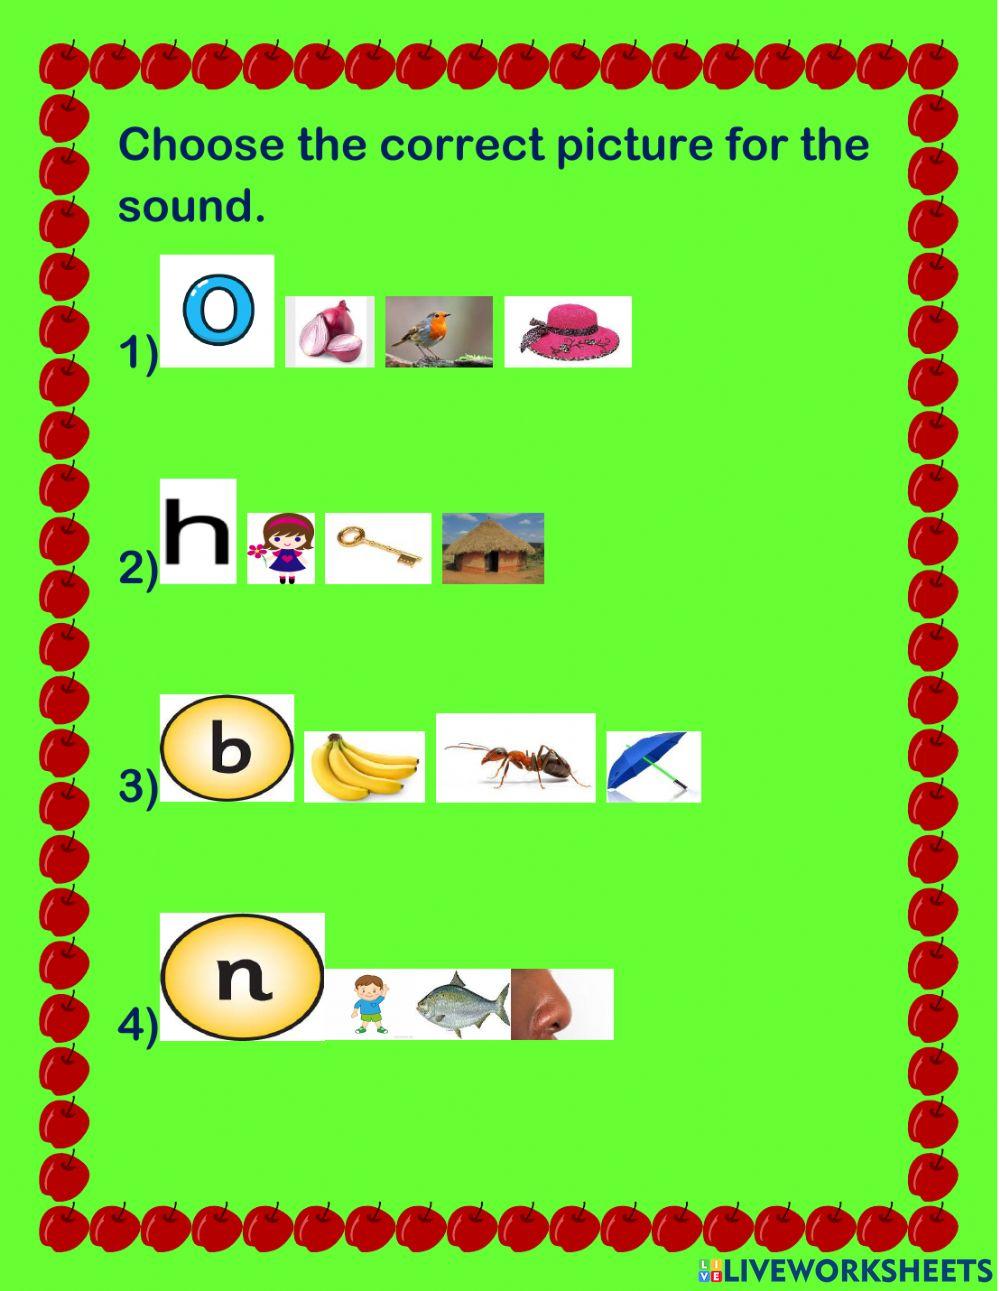 Choose the correct picture for the sound